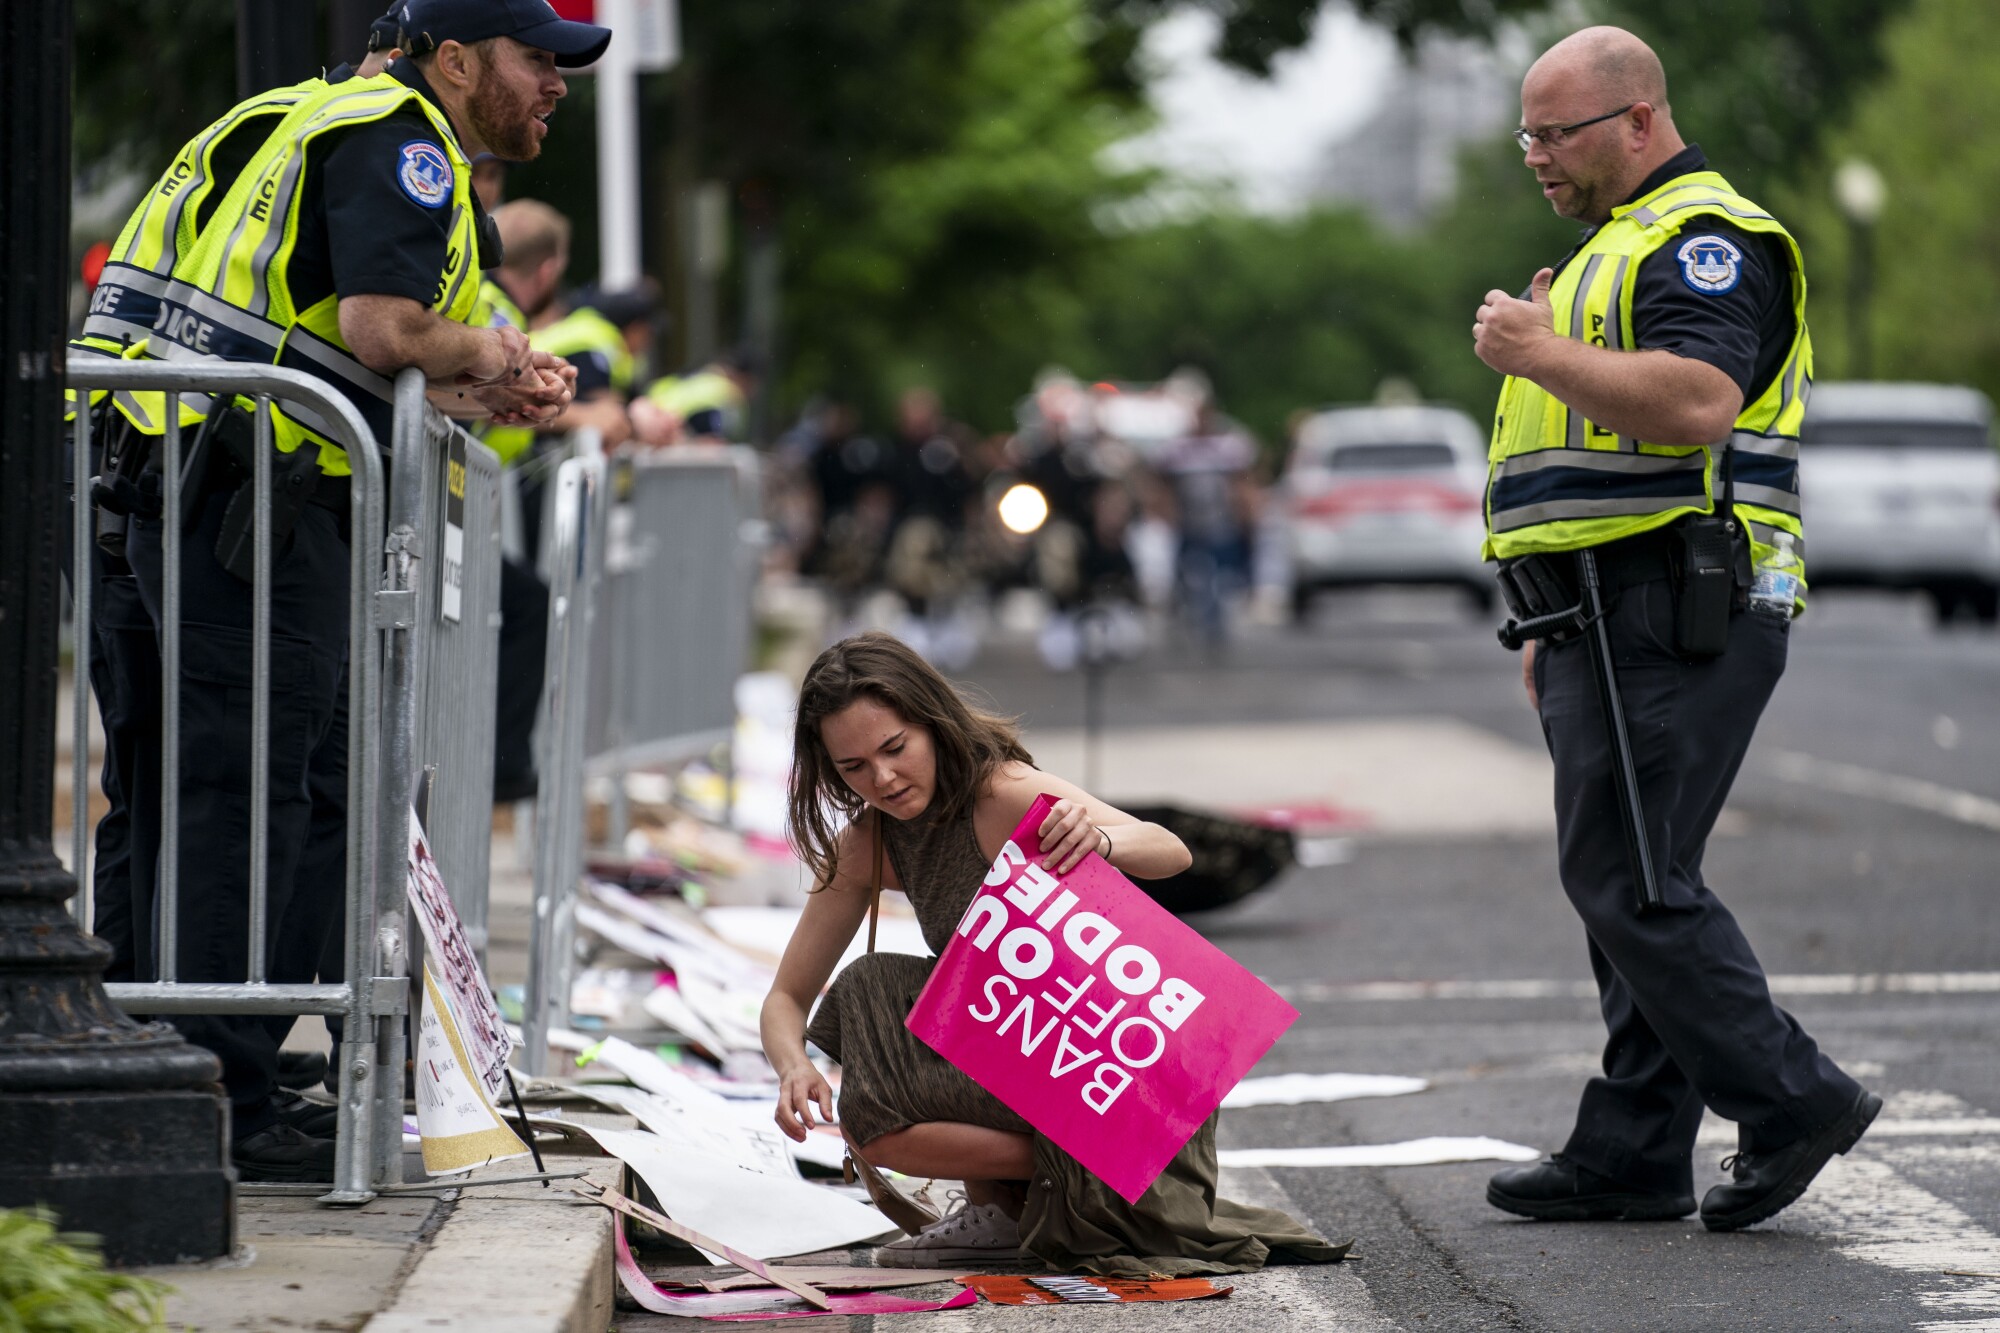     A protester puts signs back on barricades after the signs were removed by Capitol Police officers.